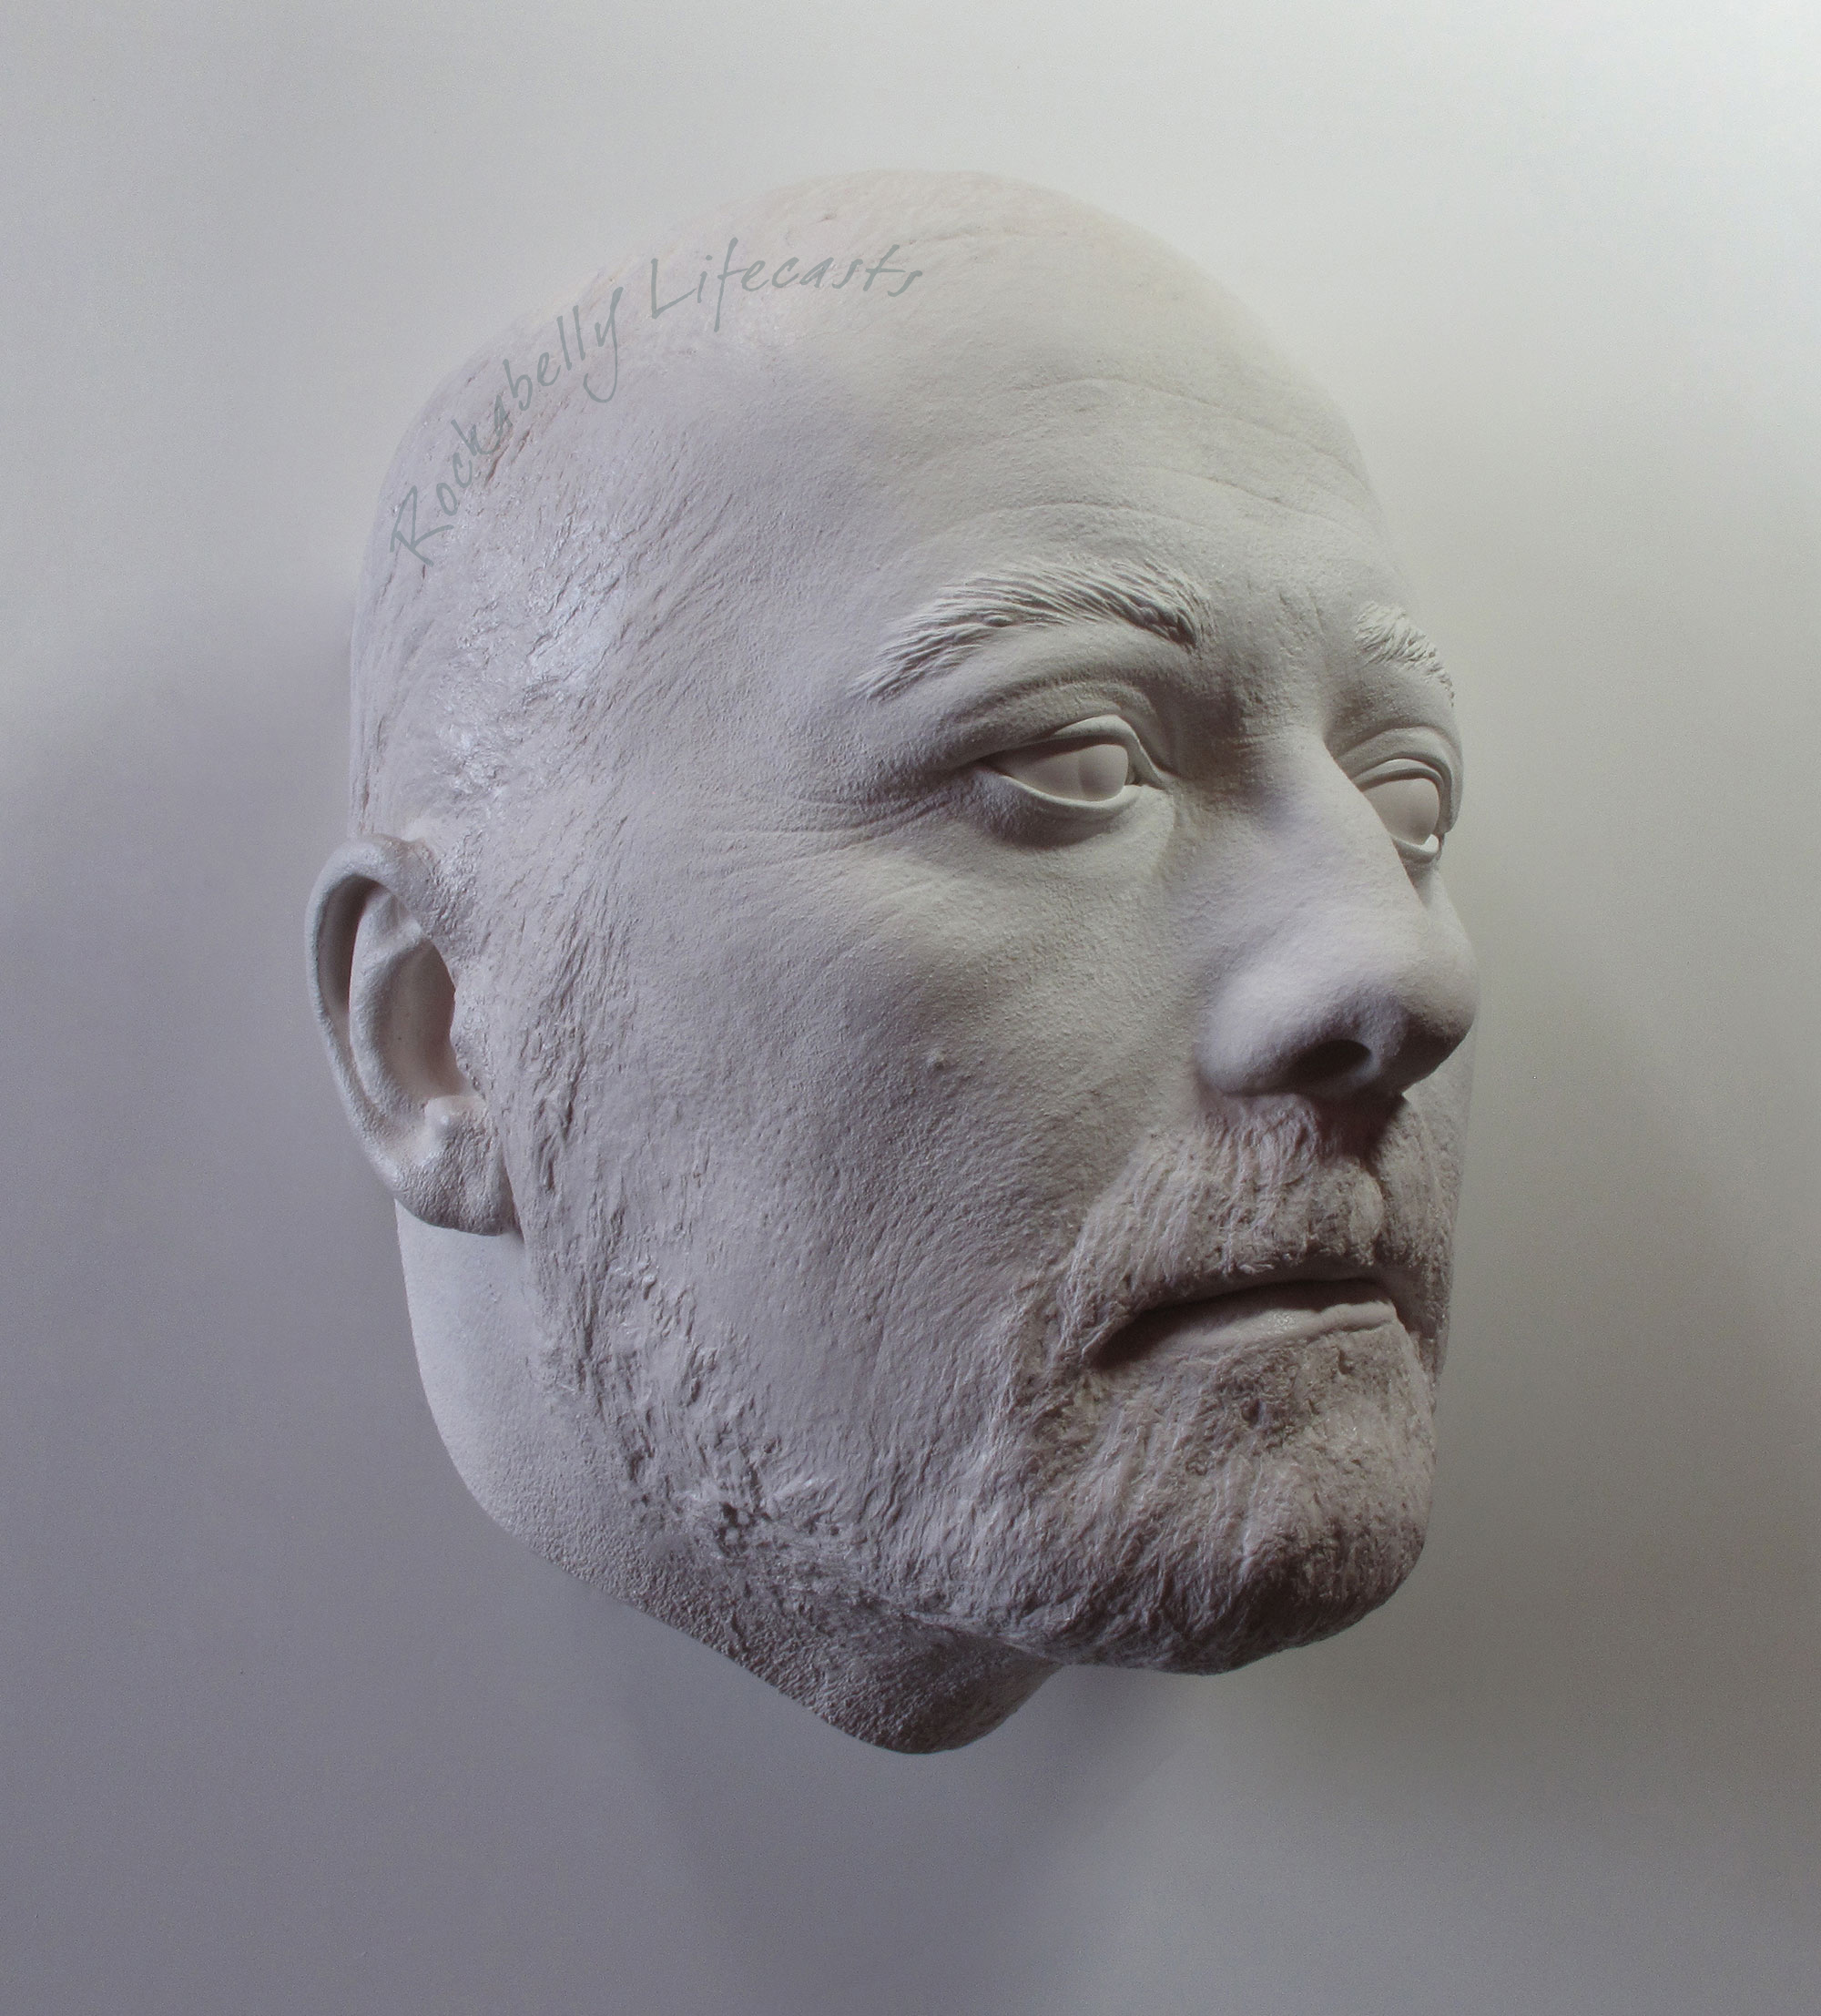 Plaster head casting by Masters & Munn